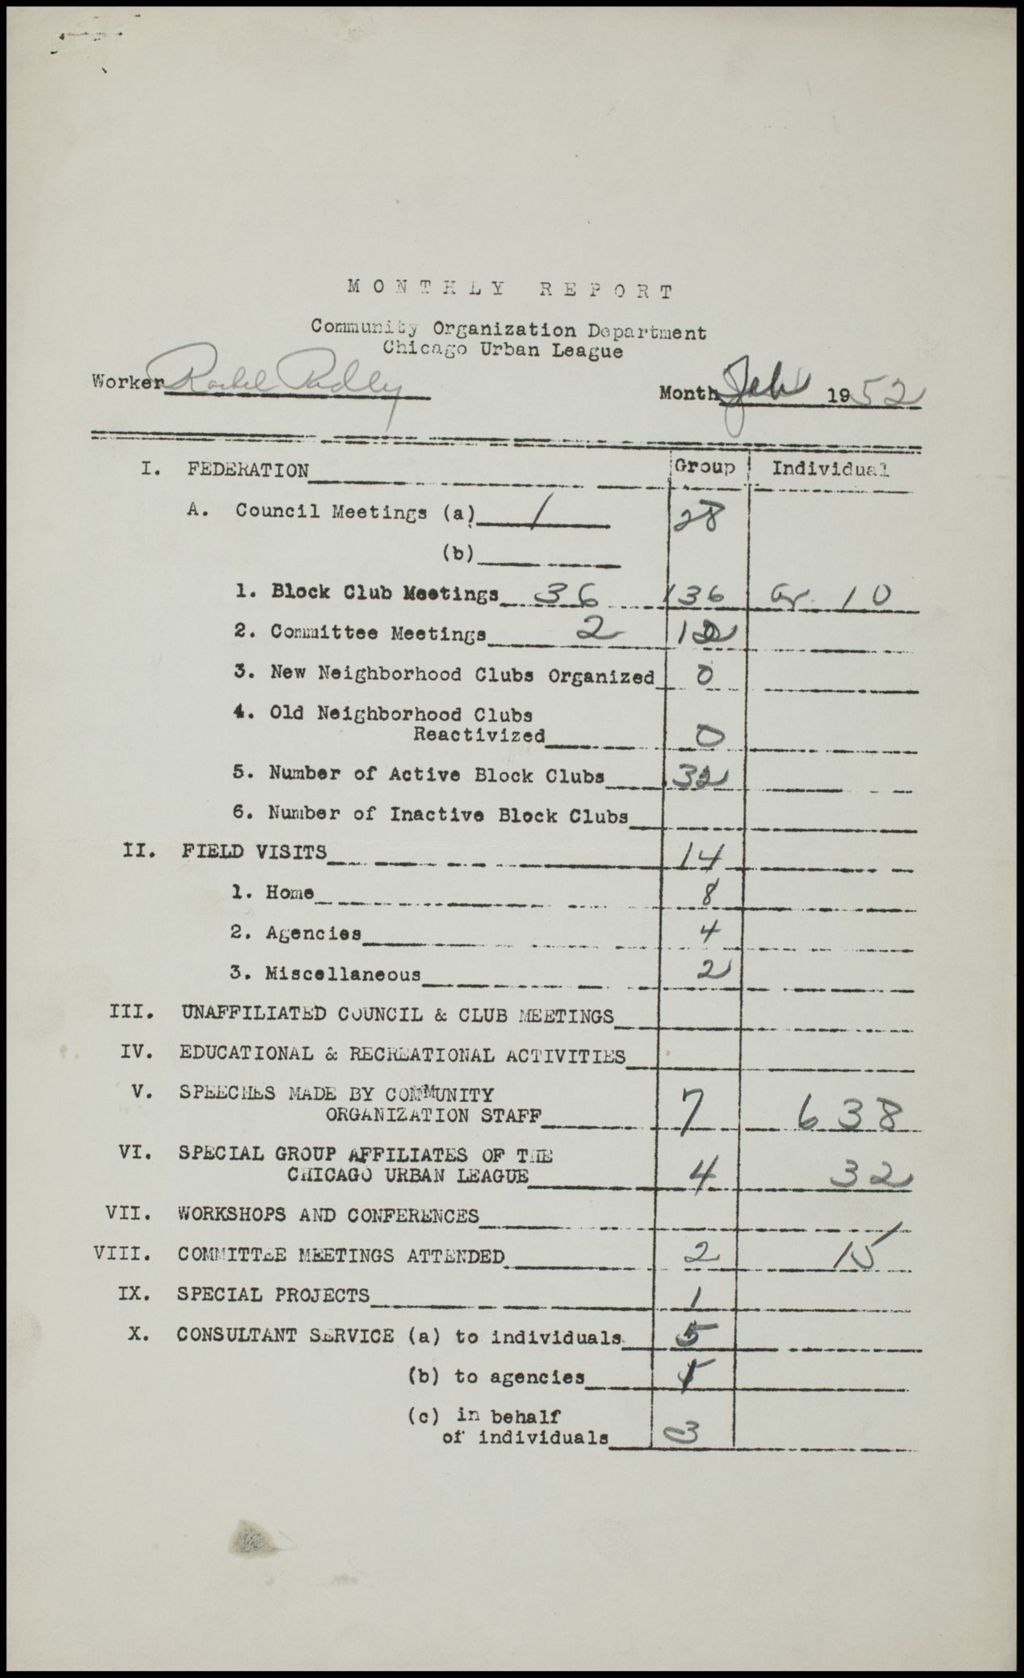 Monthly Reports, 1962 (Folder II-2179)